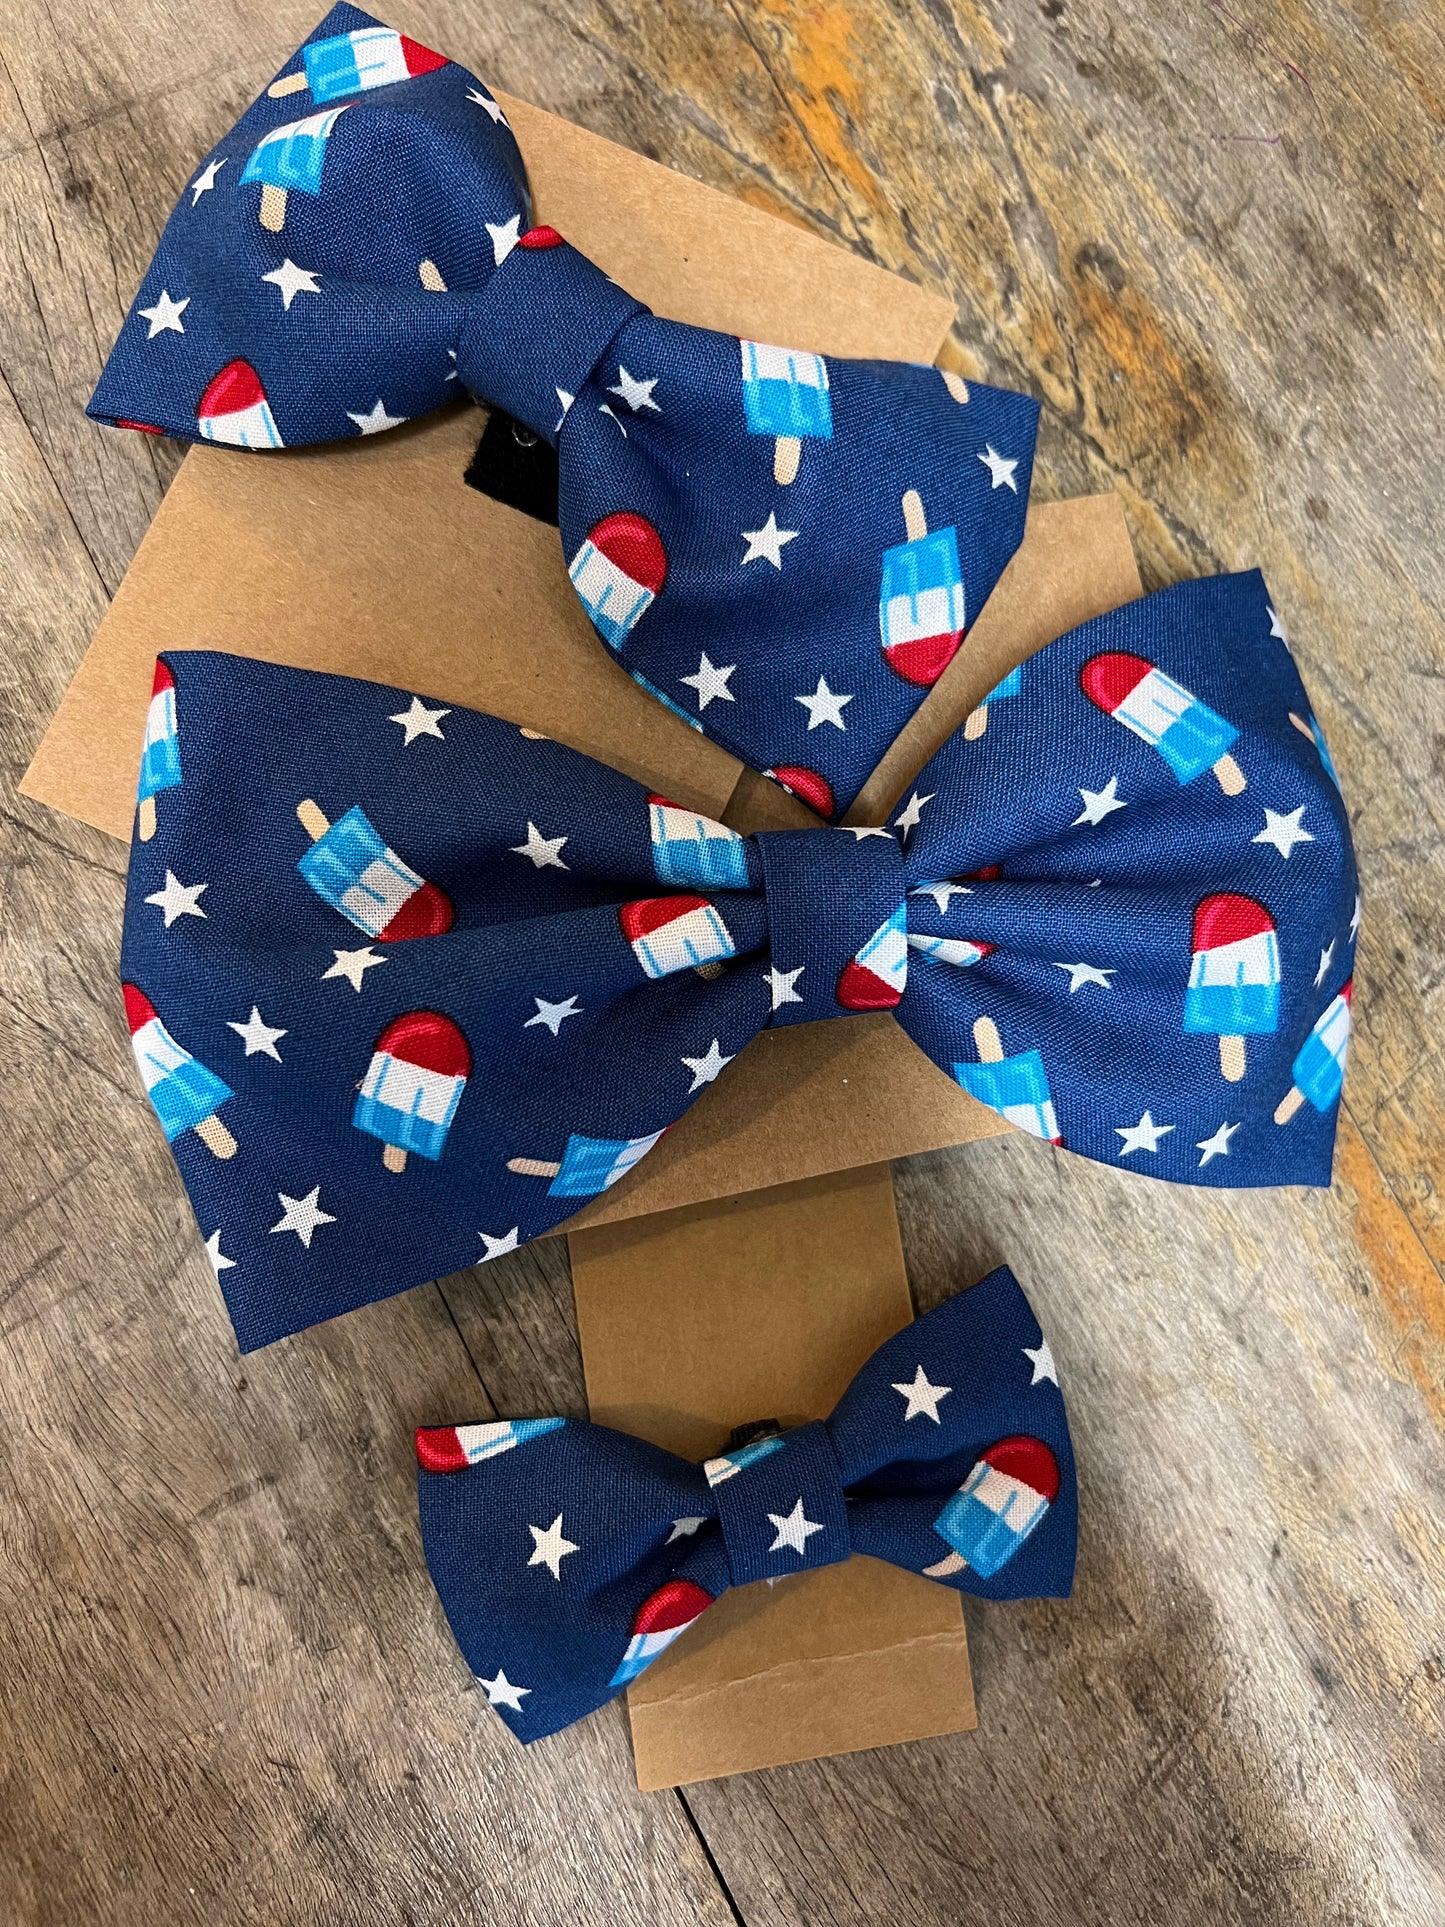 Alfred's Bows "American Pupsicle" Medium Bow